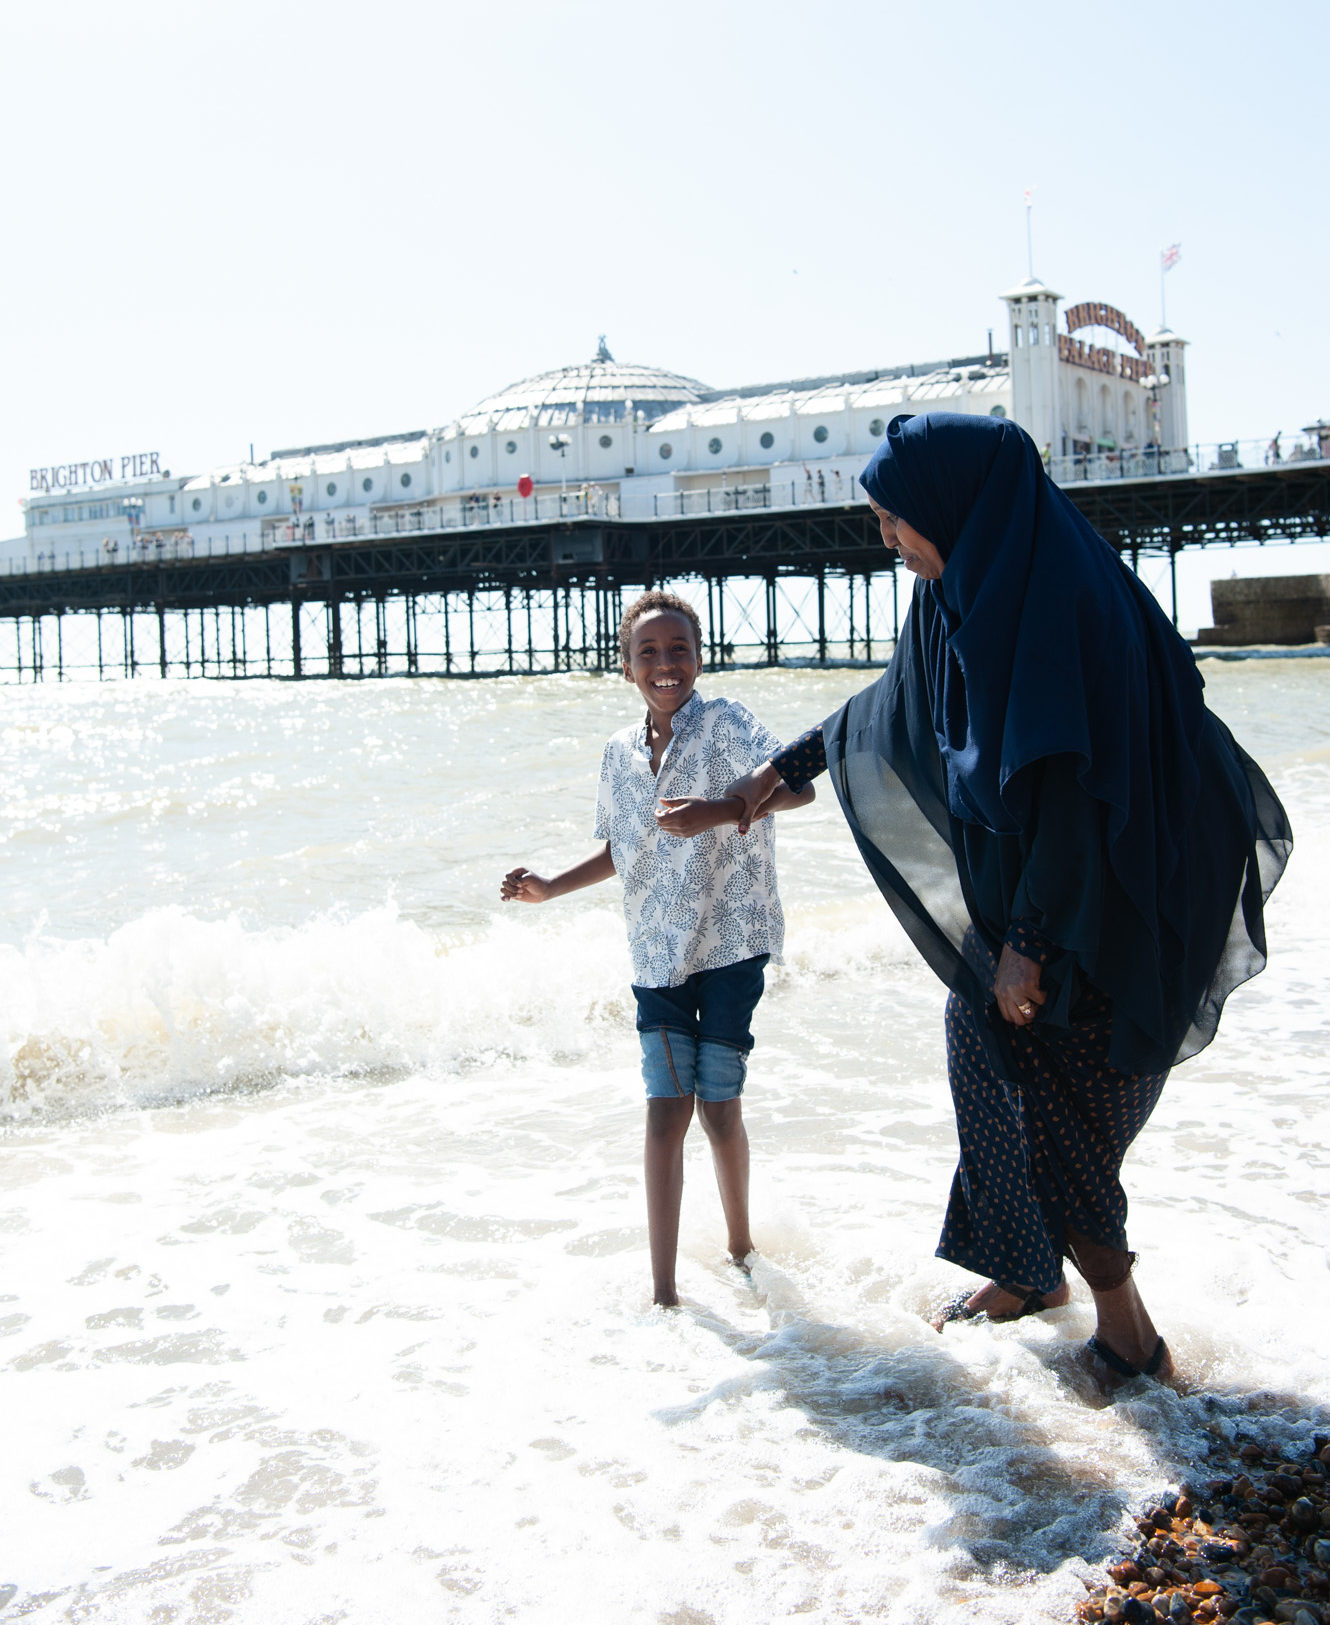 Adult and child paddling in sea, Brighton Pier in background